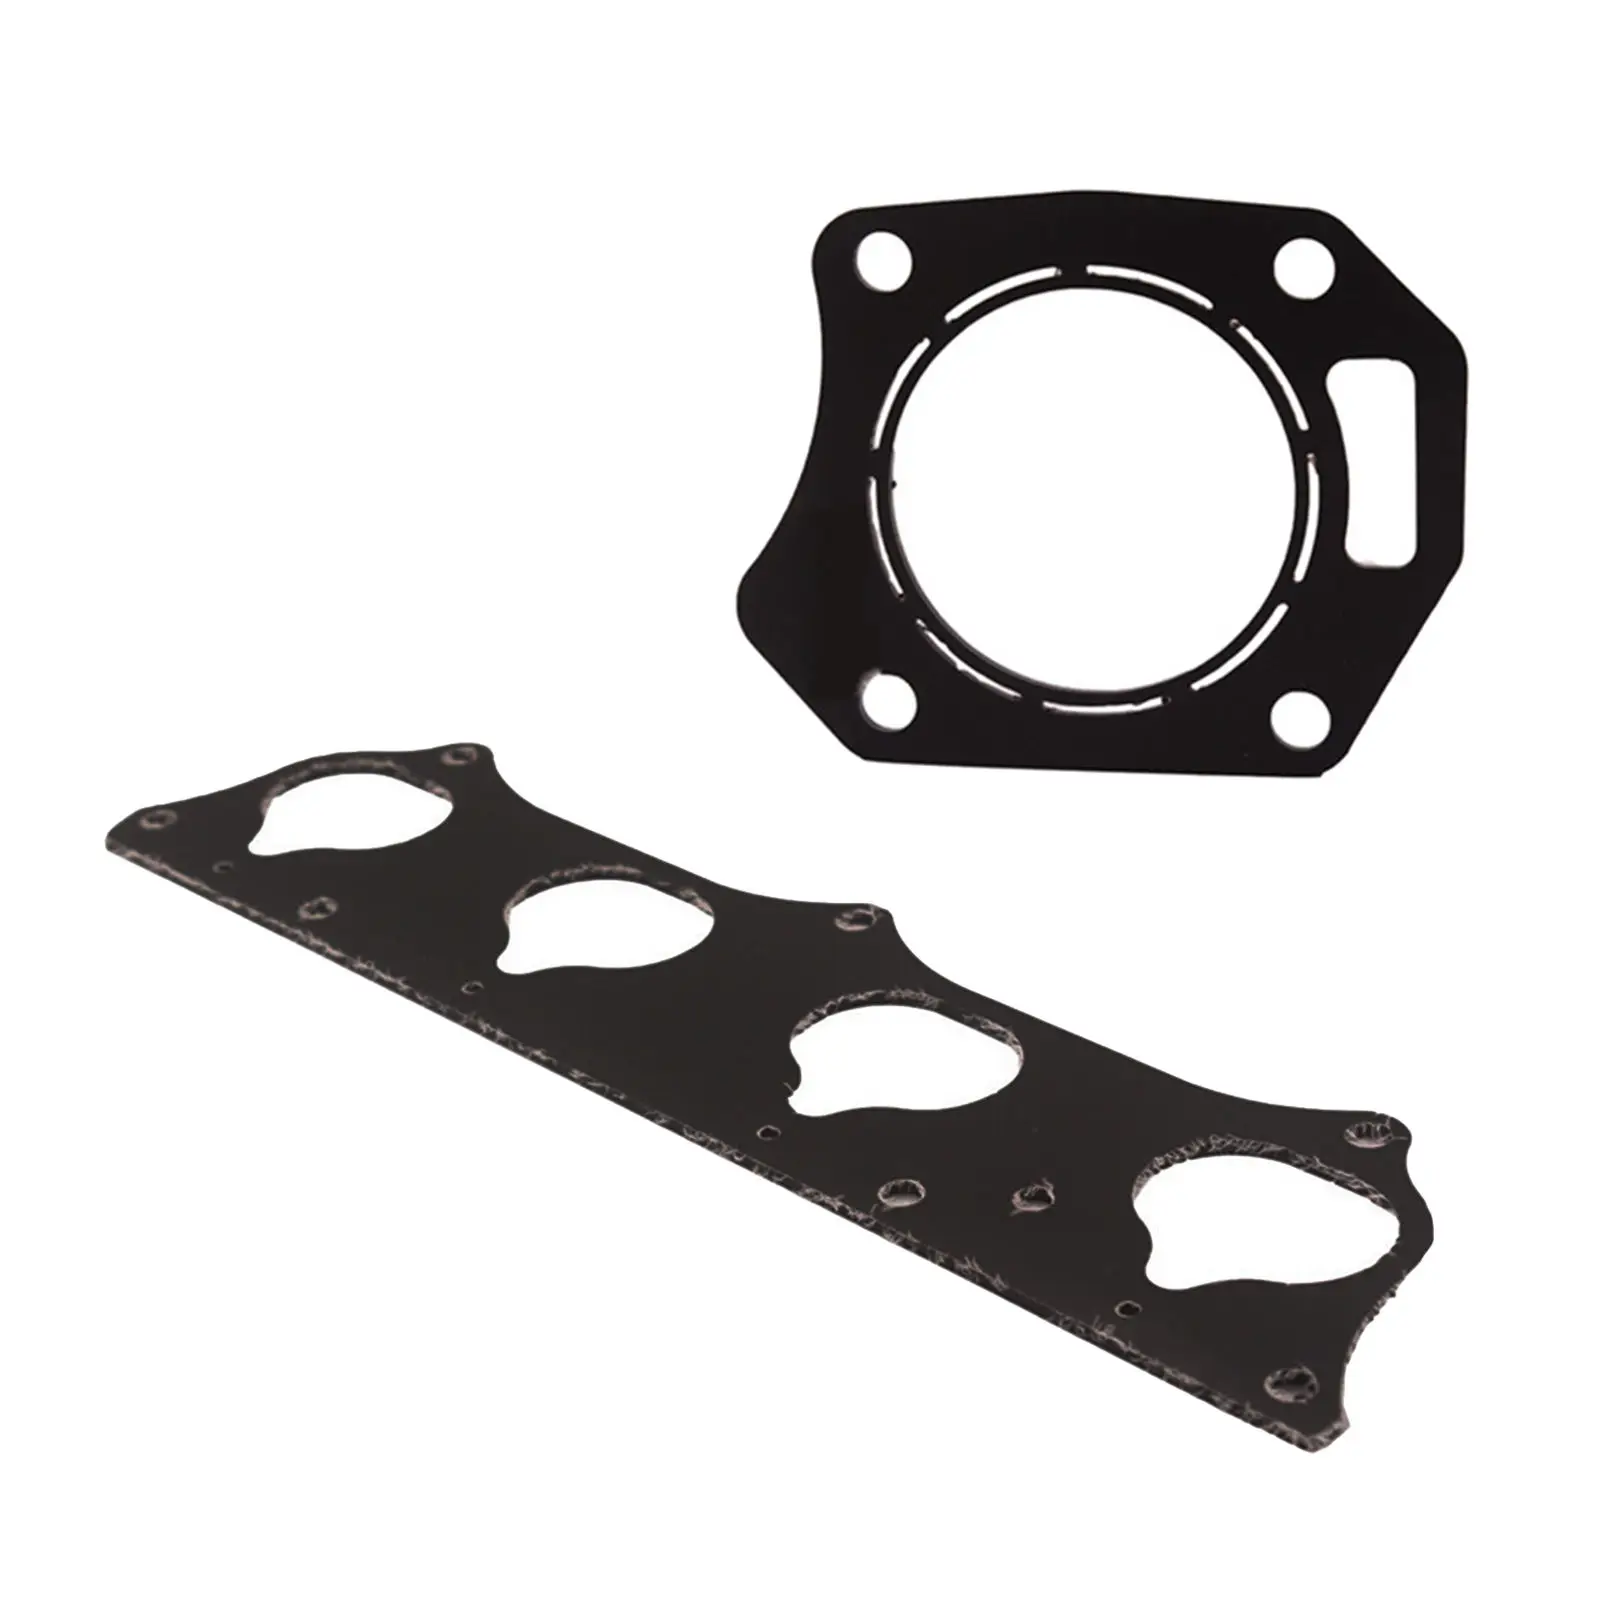 Intake Manifold Gasket Thermal Throttle Body Gasket For Honda Si and Acura RSX For Honda Civic Hatchback Si 2002-2005